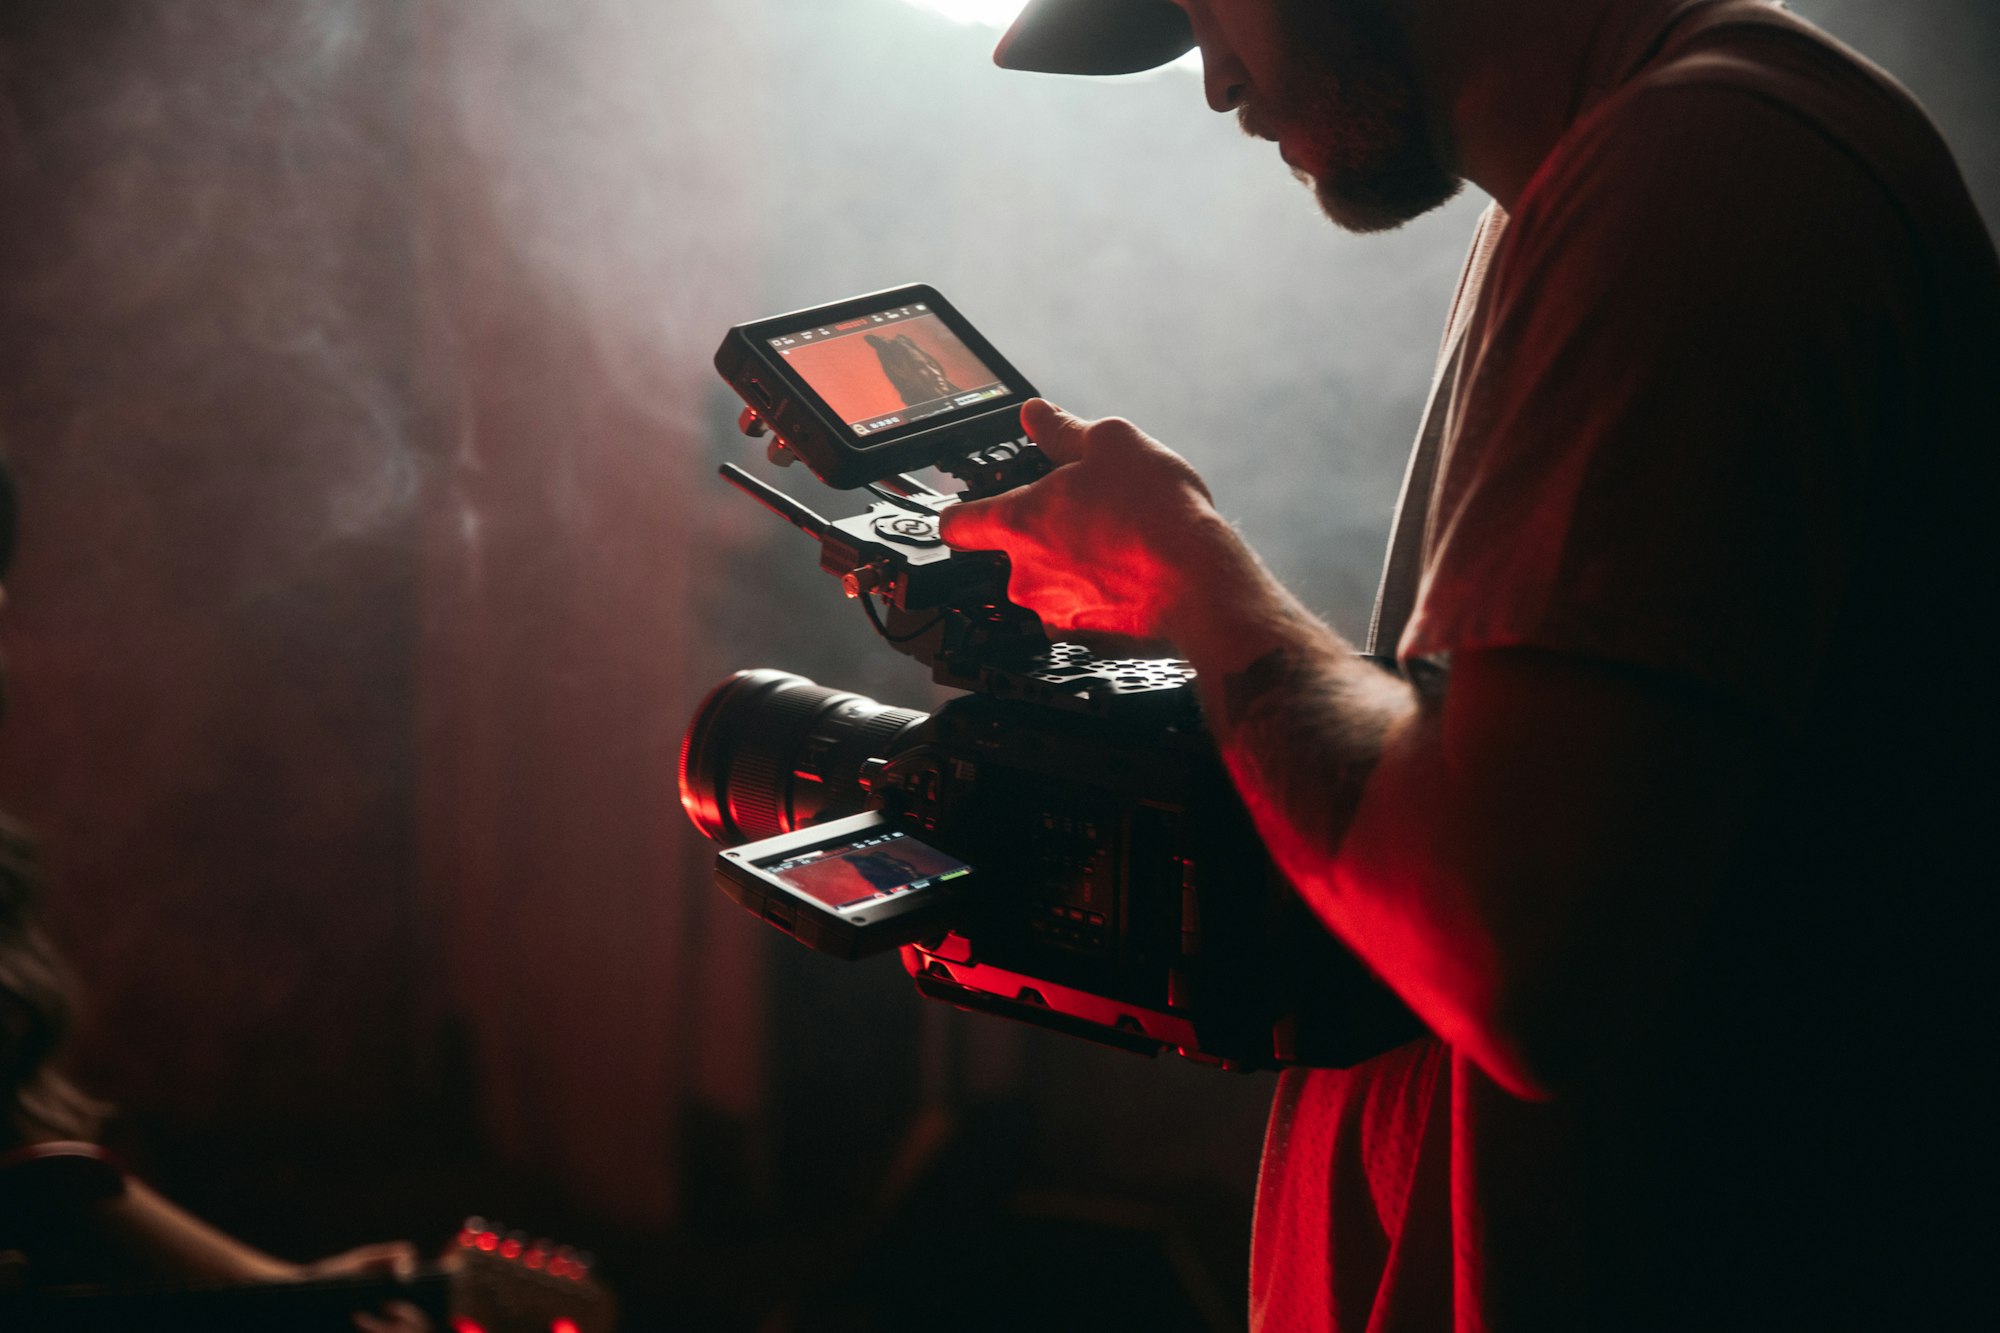 Myles Tankle's 5️⃣ Links for grokking video editing, lighting and cinematography